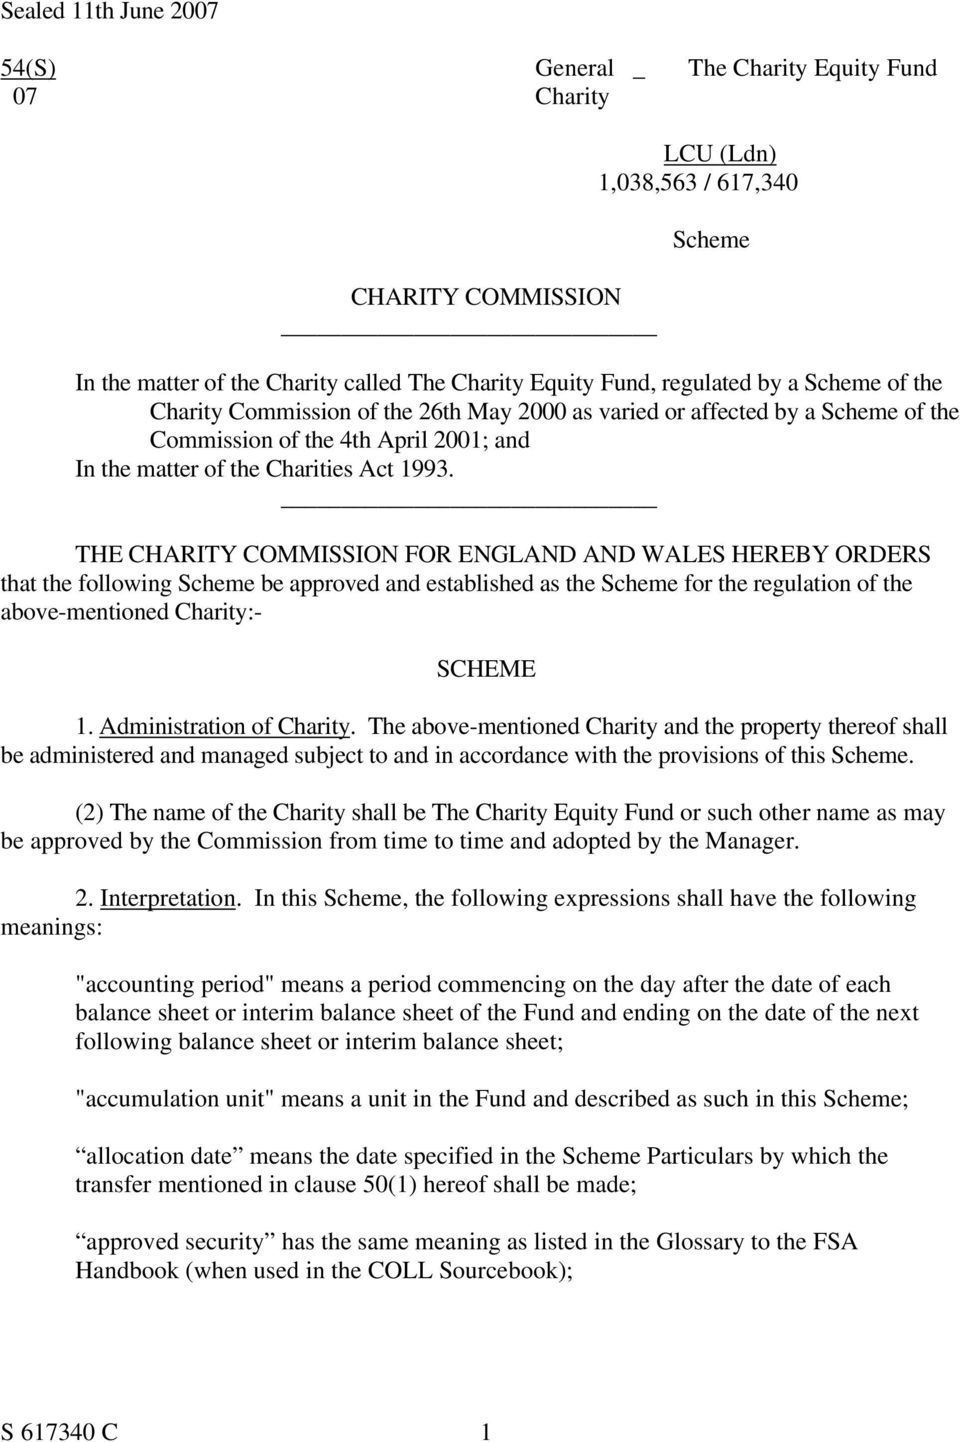 THE CHARITY COMMISSION FOR ENGLAND AND WALES HEREBY ORDERS that the following Scheme be approved and established as the Scheme for the regulation of the above-mentioned Charity:- SCHEME 1.